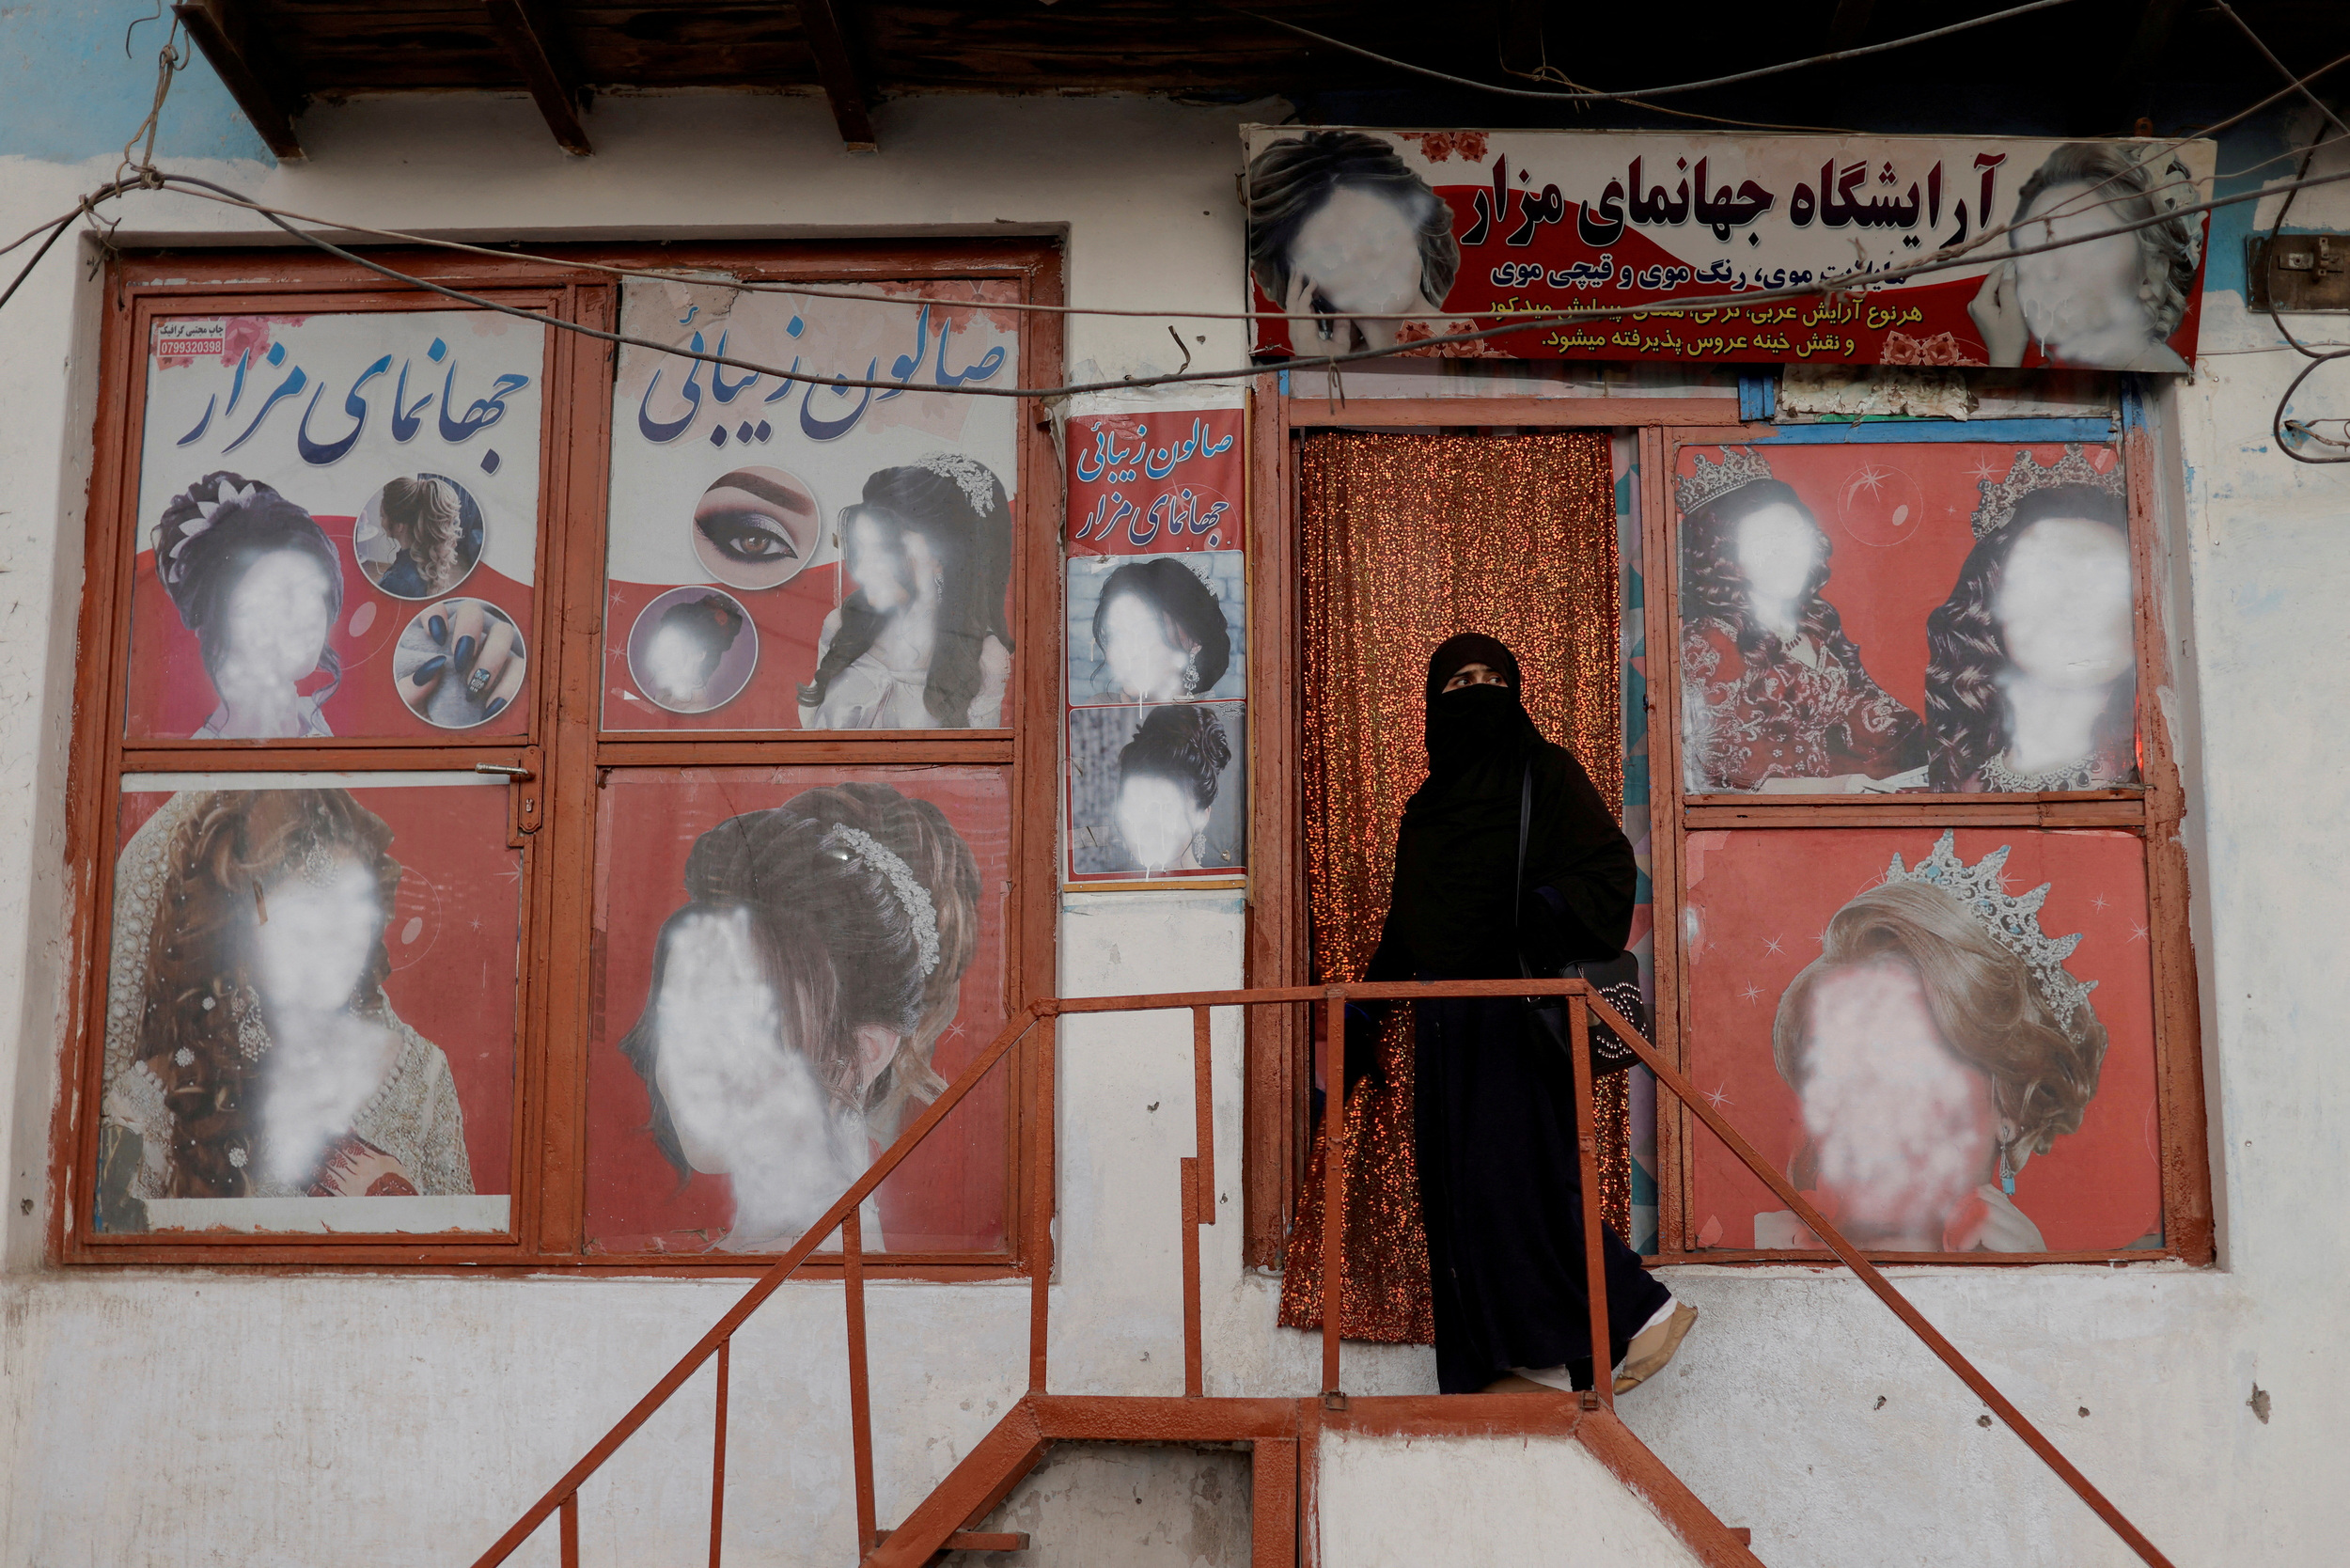 FILE PHOTO: A woman wearing a niqab enters a beauty salon where the ads of women have been defaced by a shopkeeper in Kabul, Afghanistan October 6, 2021. REUTERS/Jorge Silva/File Photo